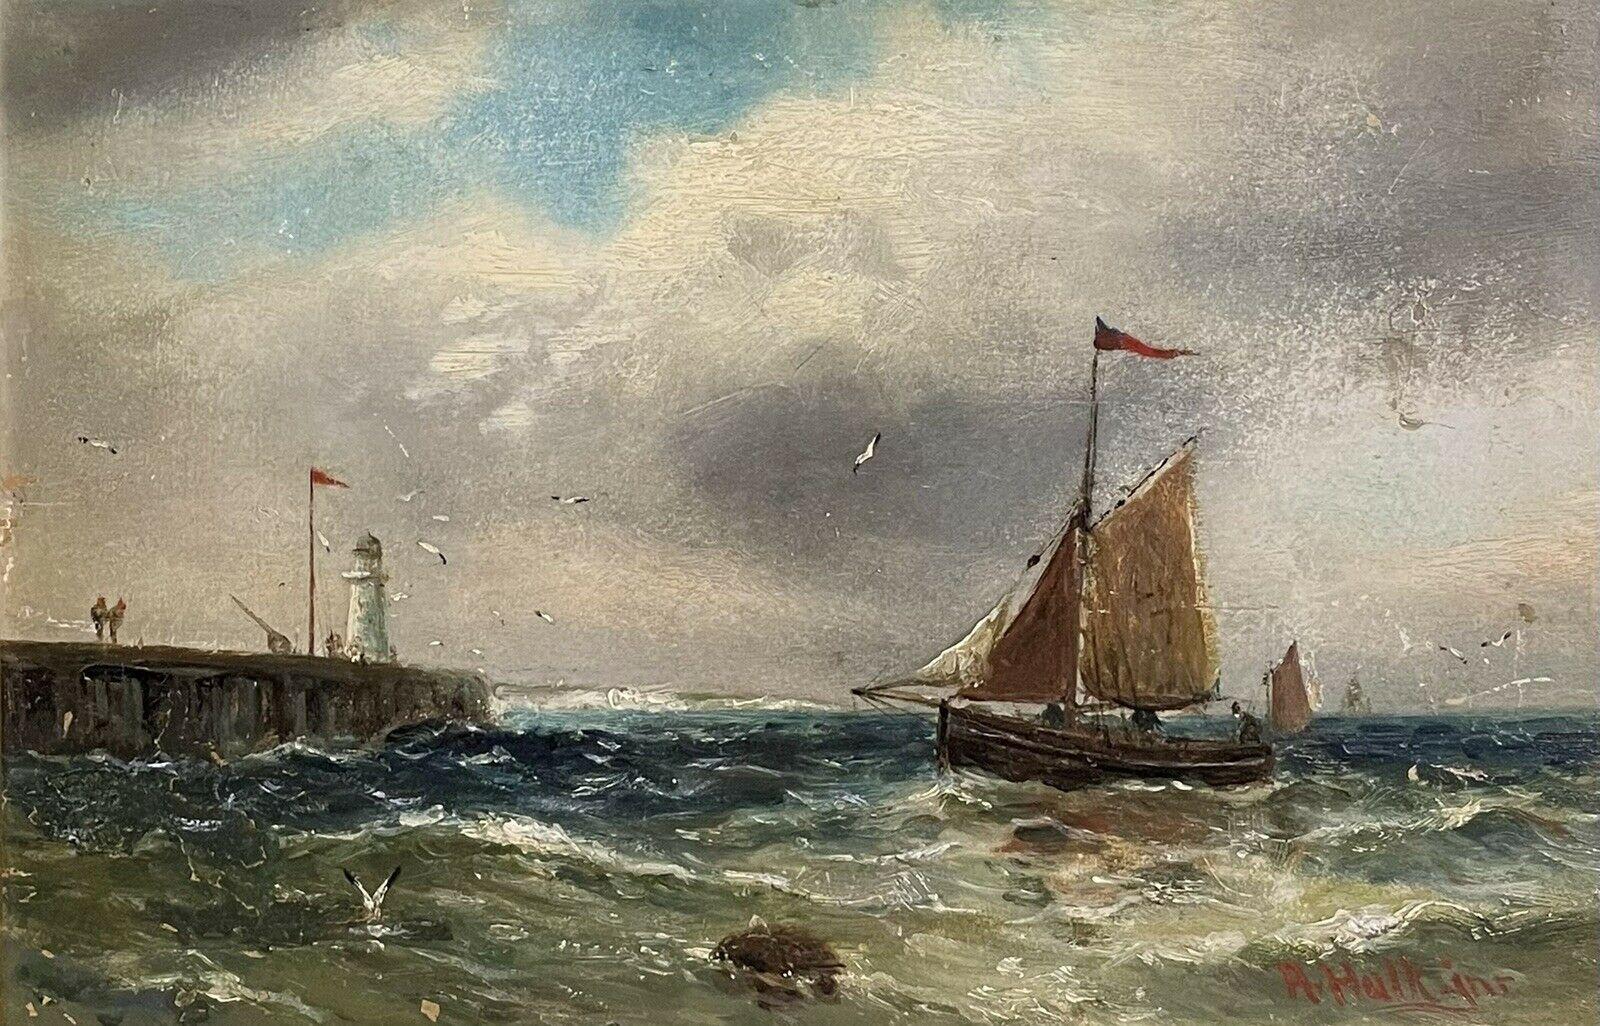 Abraham Hulk jnr 1851 - 1922 Landscape Painting - Victorian British Marine Oil Painting, Fishing Boat off a Jetty in Stormy Waters